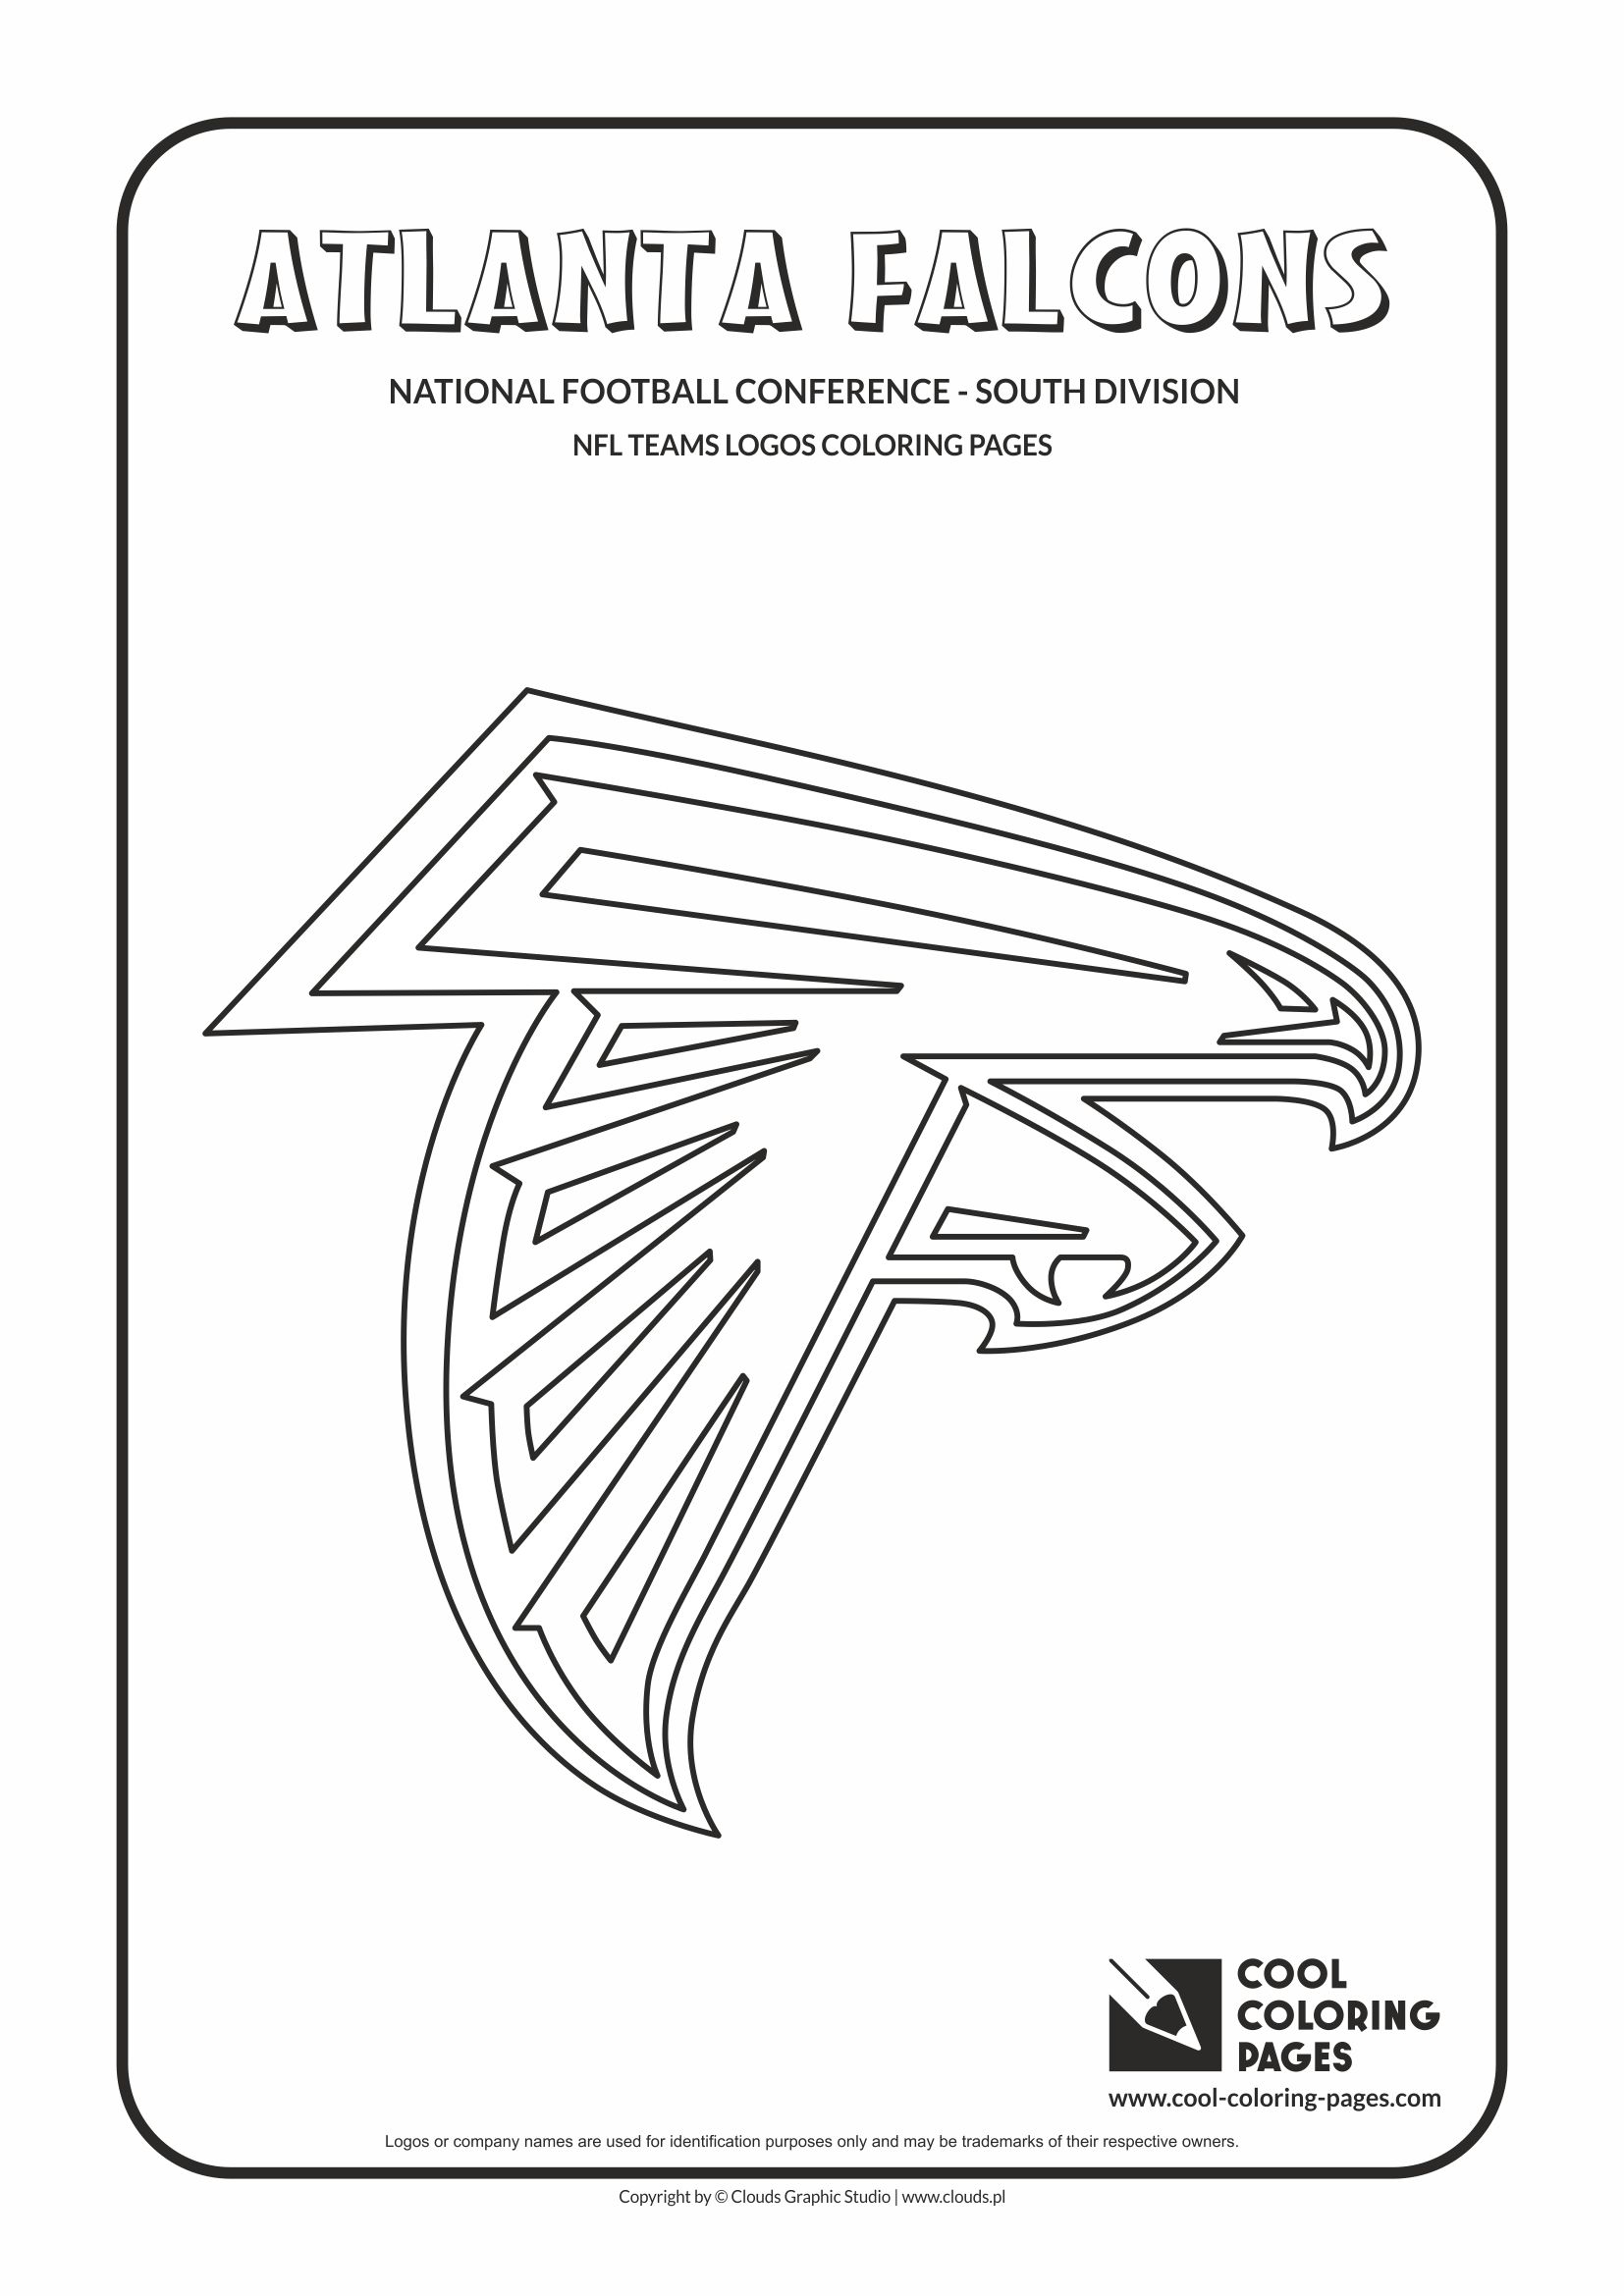 Cool Coloring Pages - NFL American Football Clubs Logos - National Football Conference - East Division / Atlanta Falcons logo / Coloring page with Atlanta Falcons logo